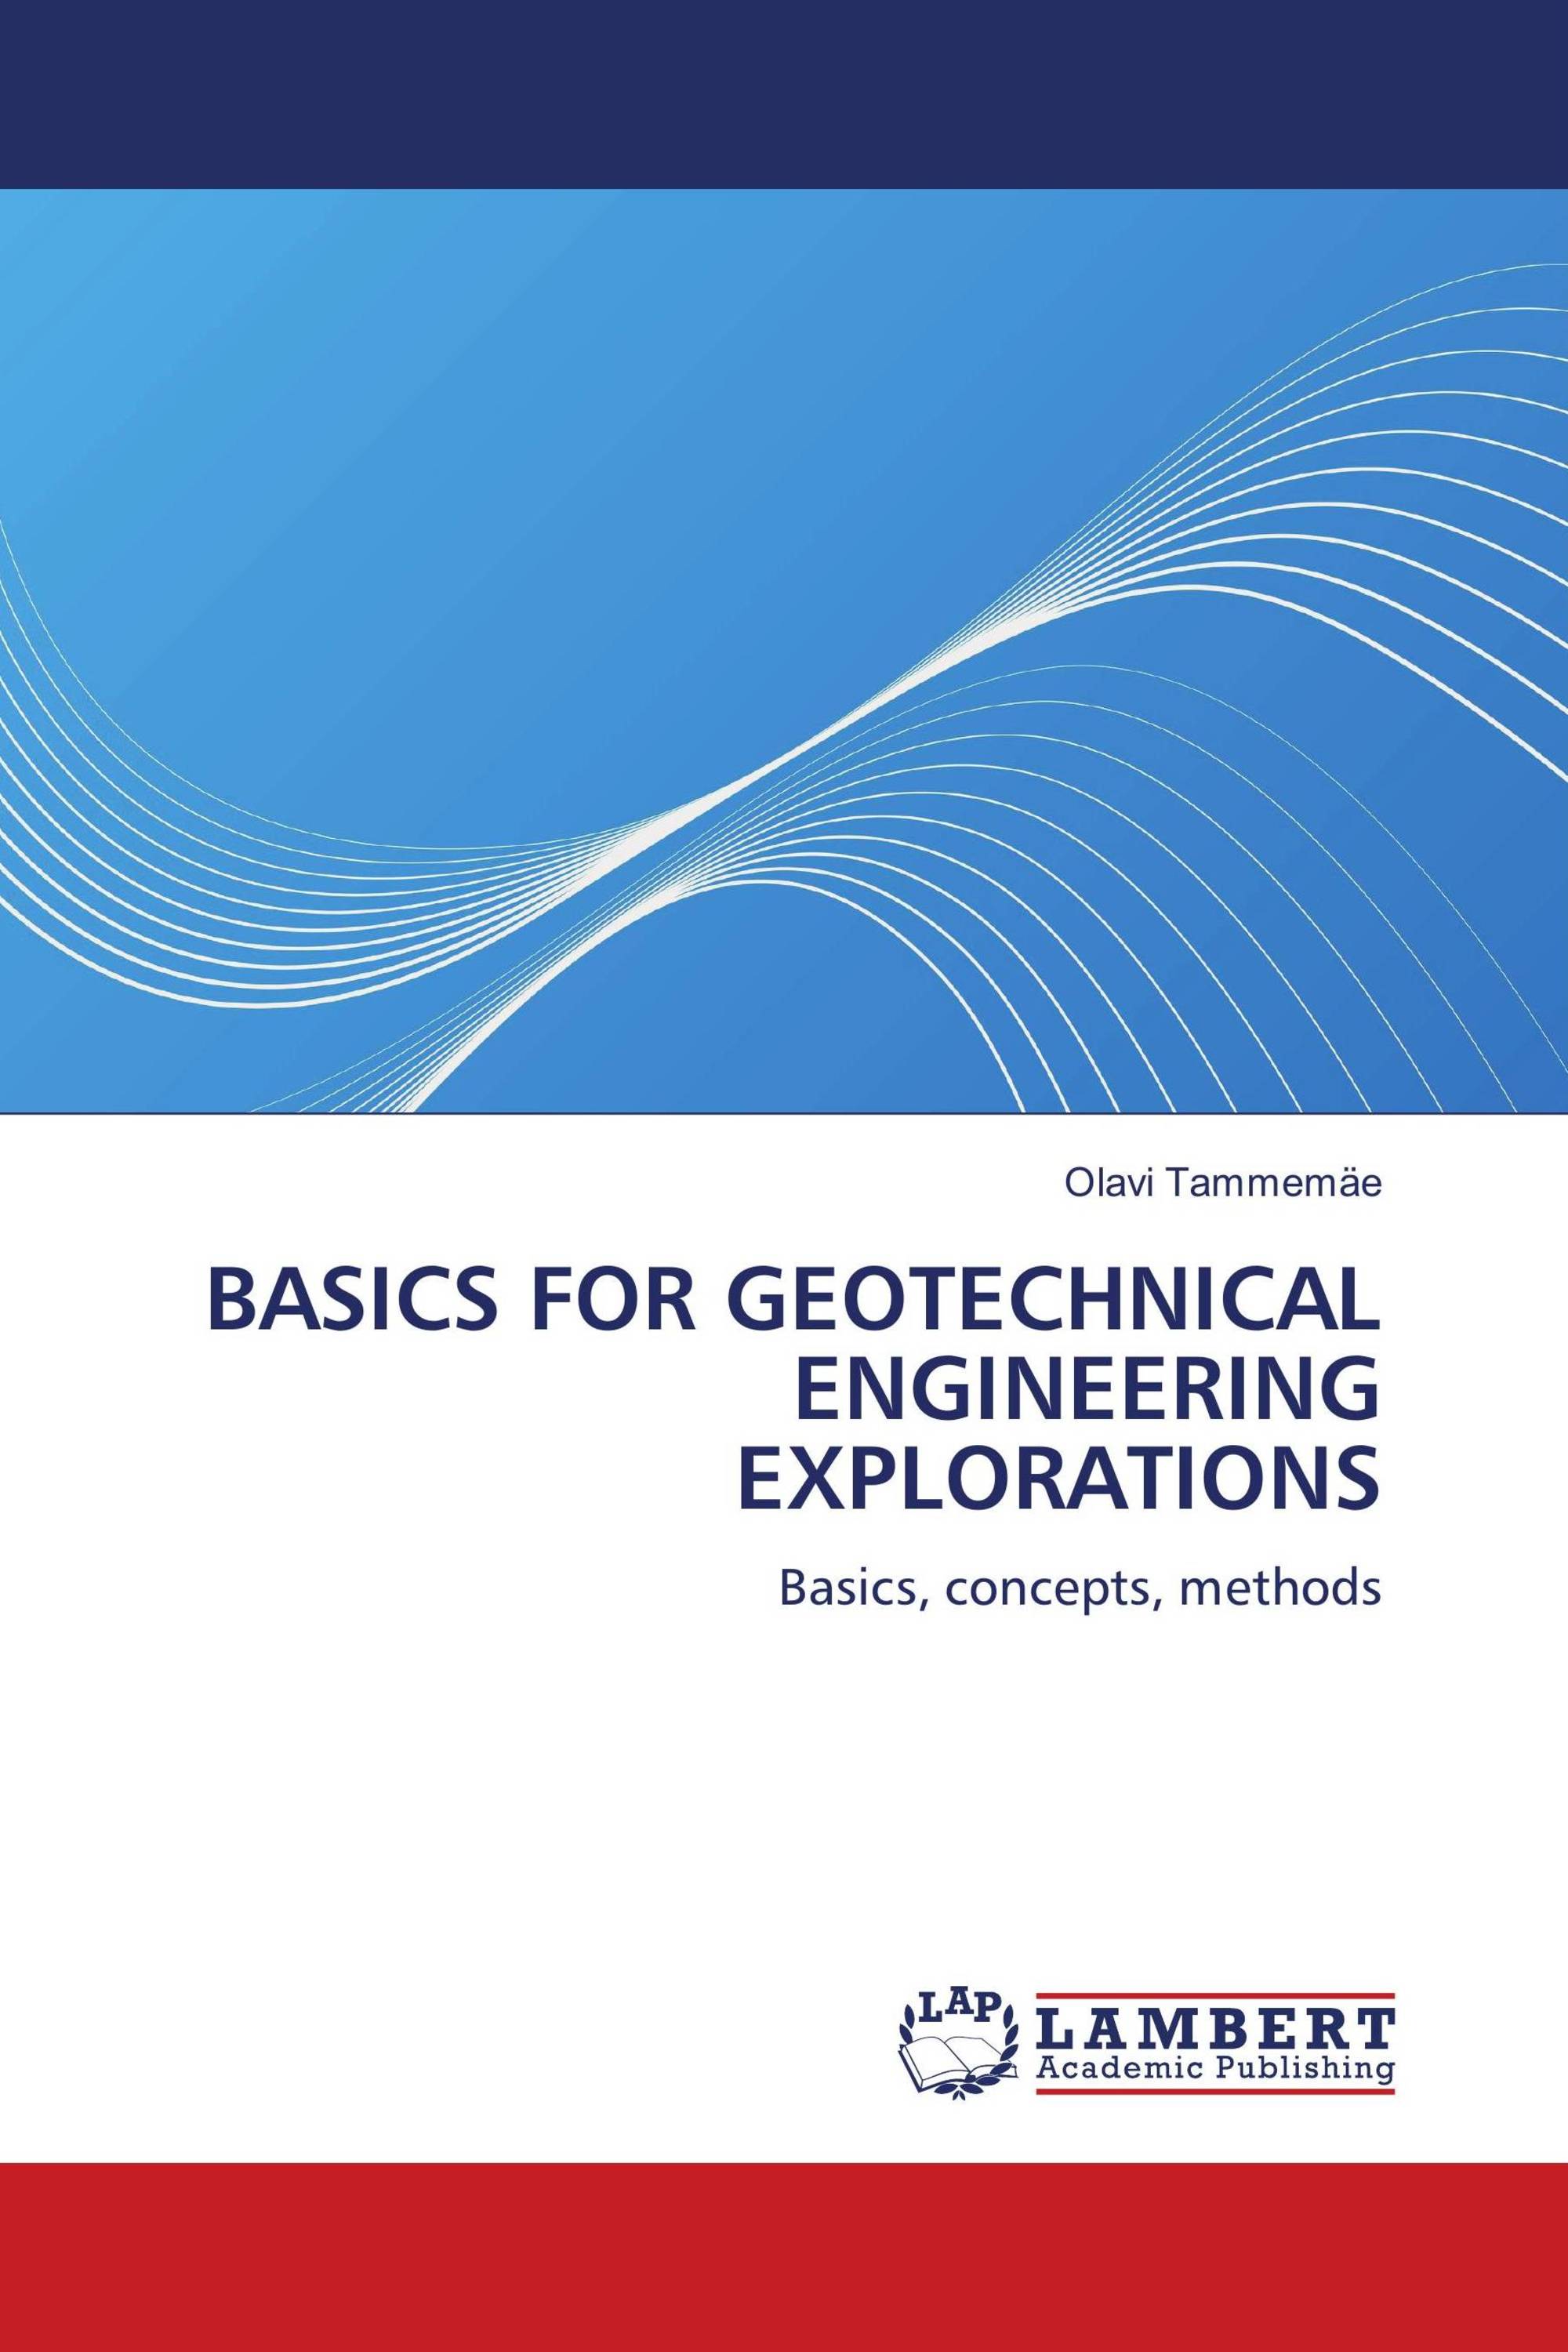 BASICS FOR GEOTECHNICAL ENGINEERING EXPLORATIONS / 978 3 8383 0439 7